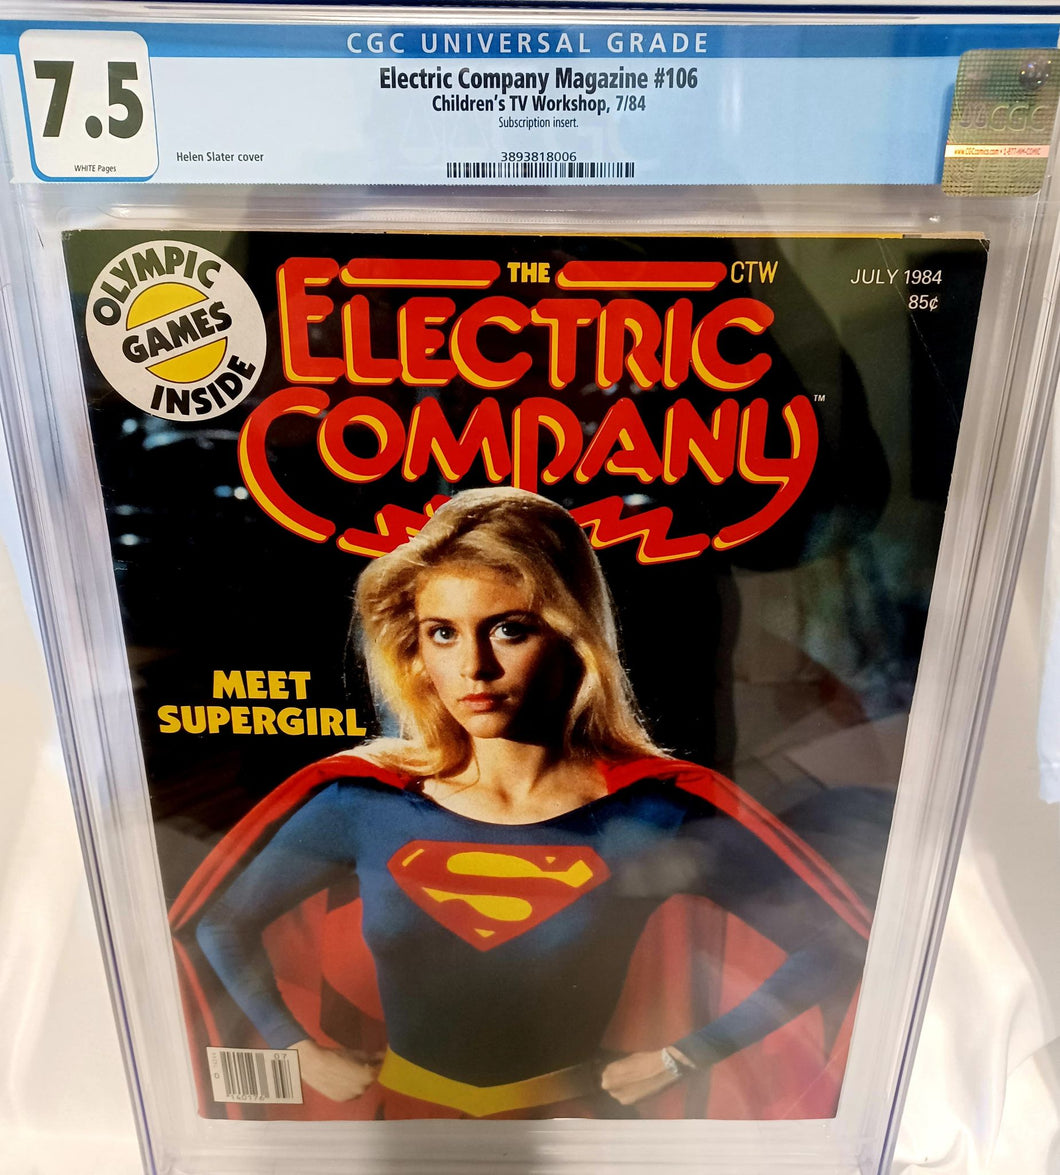 Electric Company Magazine #106 July 1984 CGC 7.5 - Helen Slater as Supergirl! Highest on census